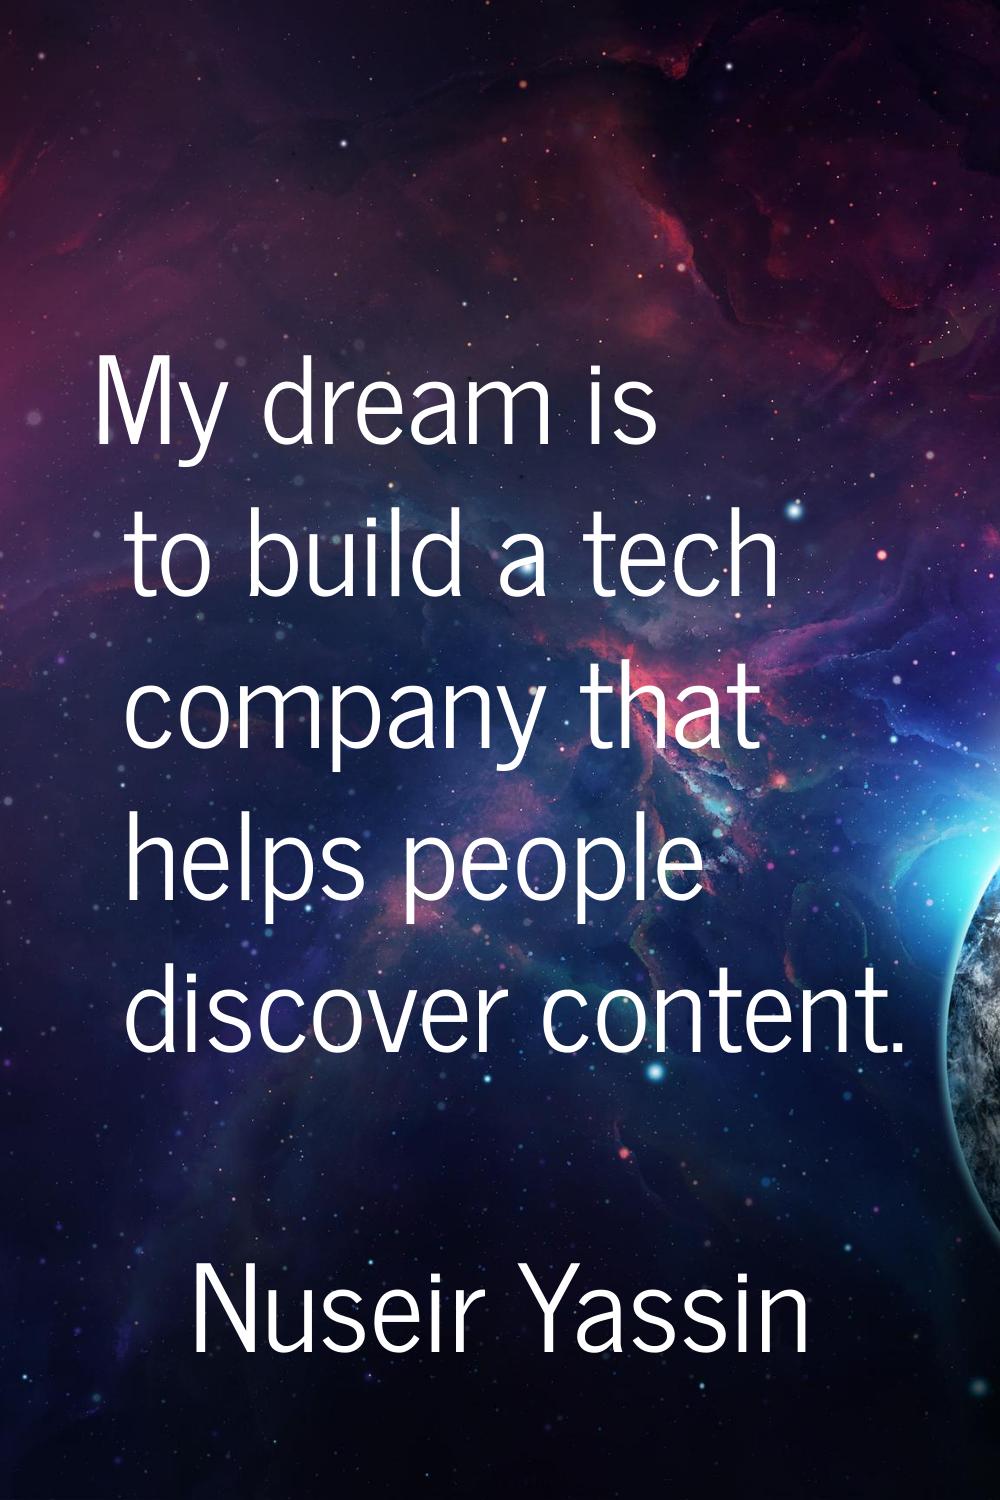 My dream is to build a tech company that helps people discover content.